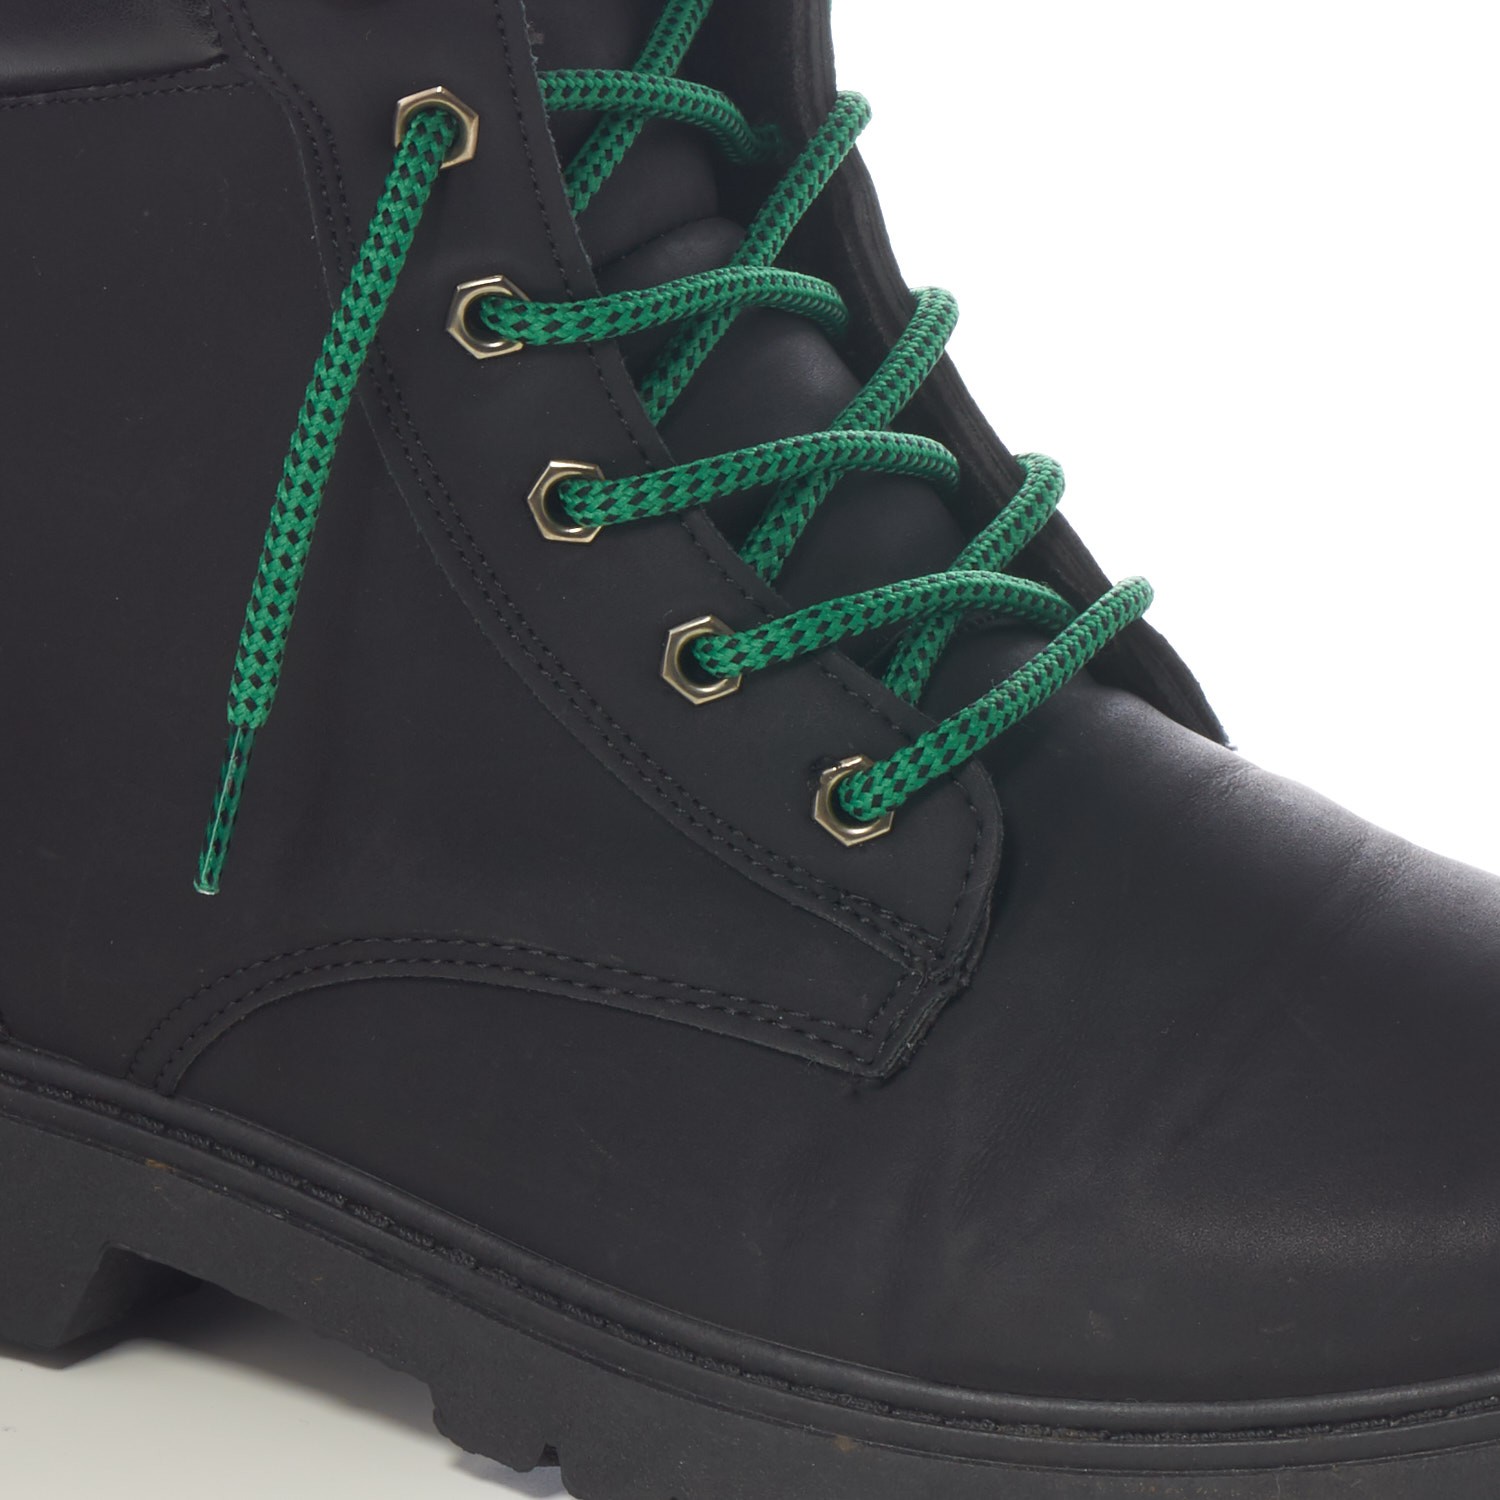 Fleck Emerald Green with Black Shoe Laces 4 Kalsi Cords